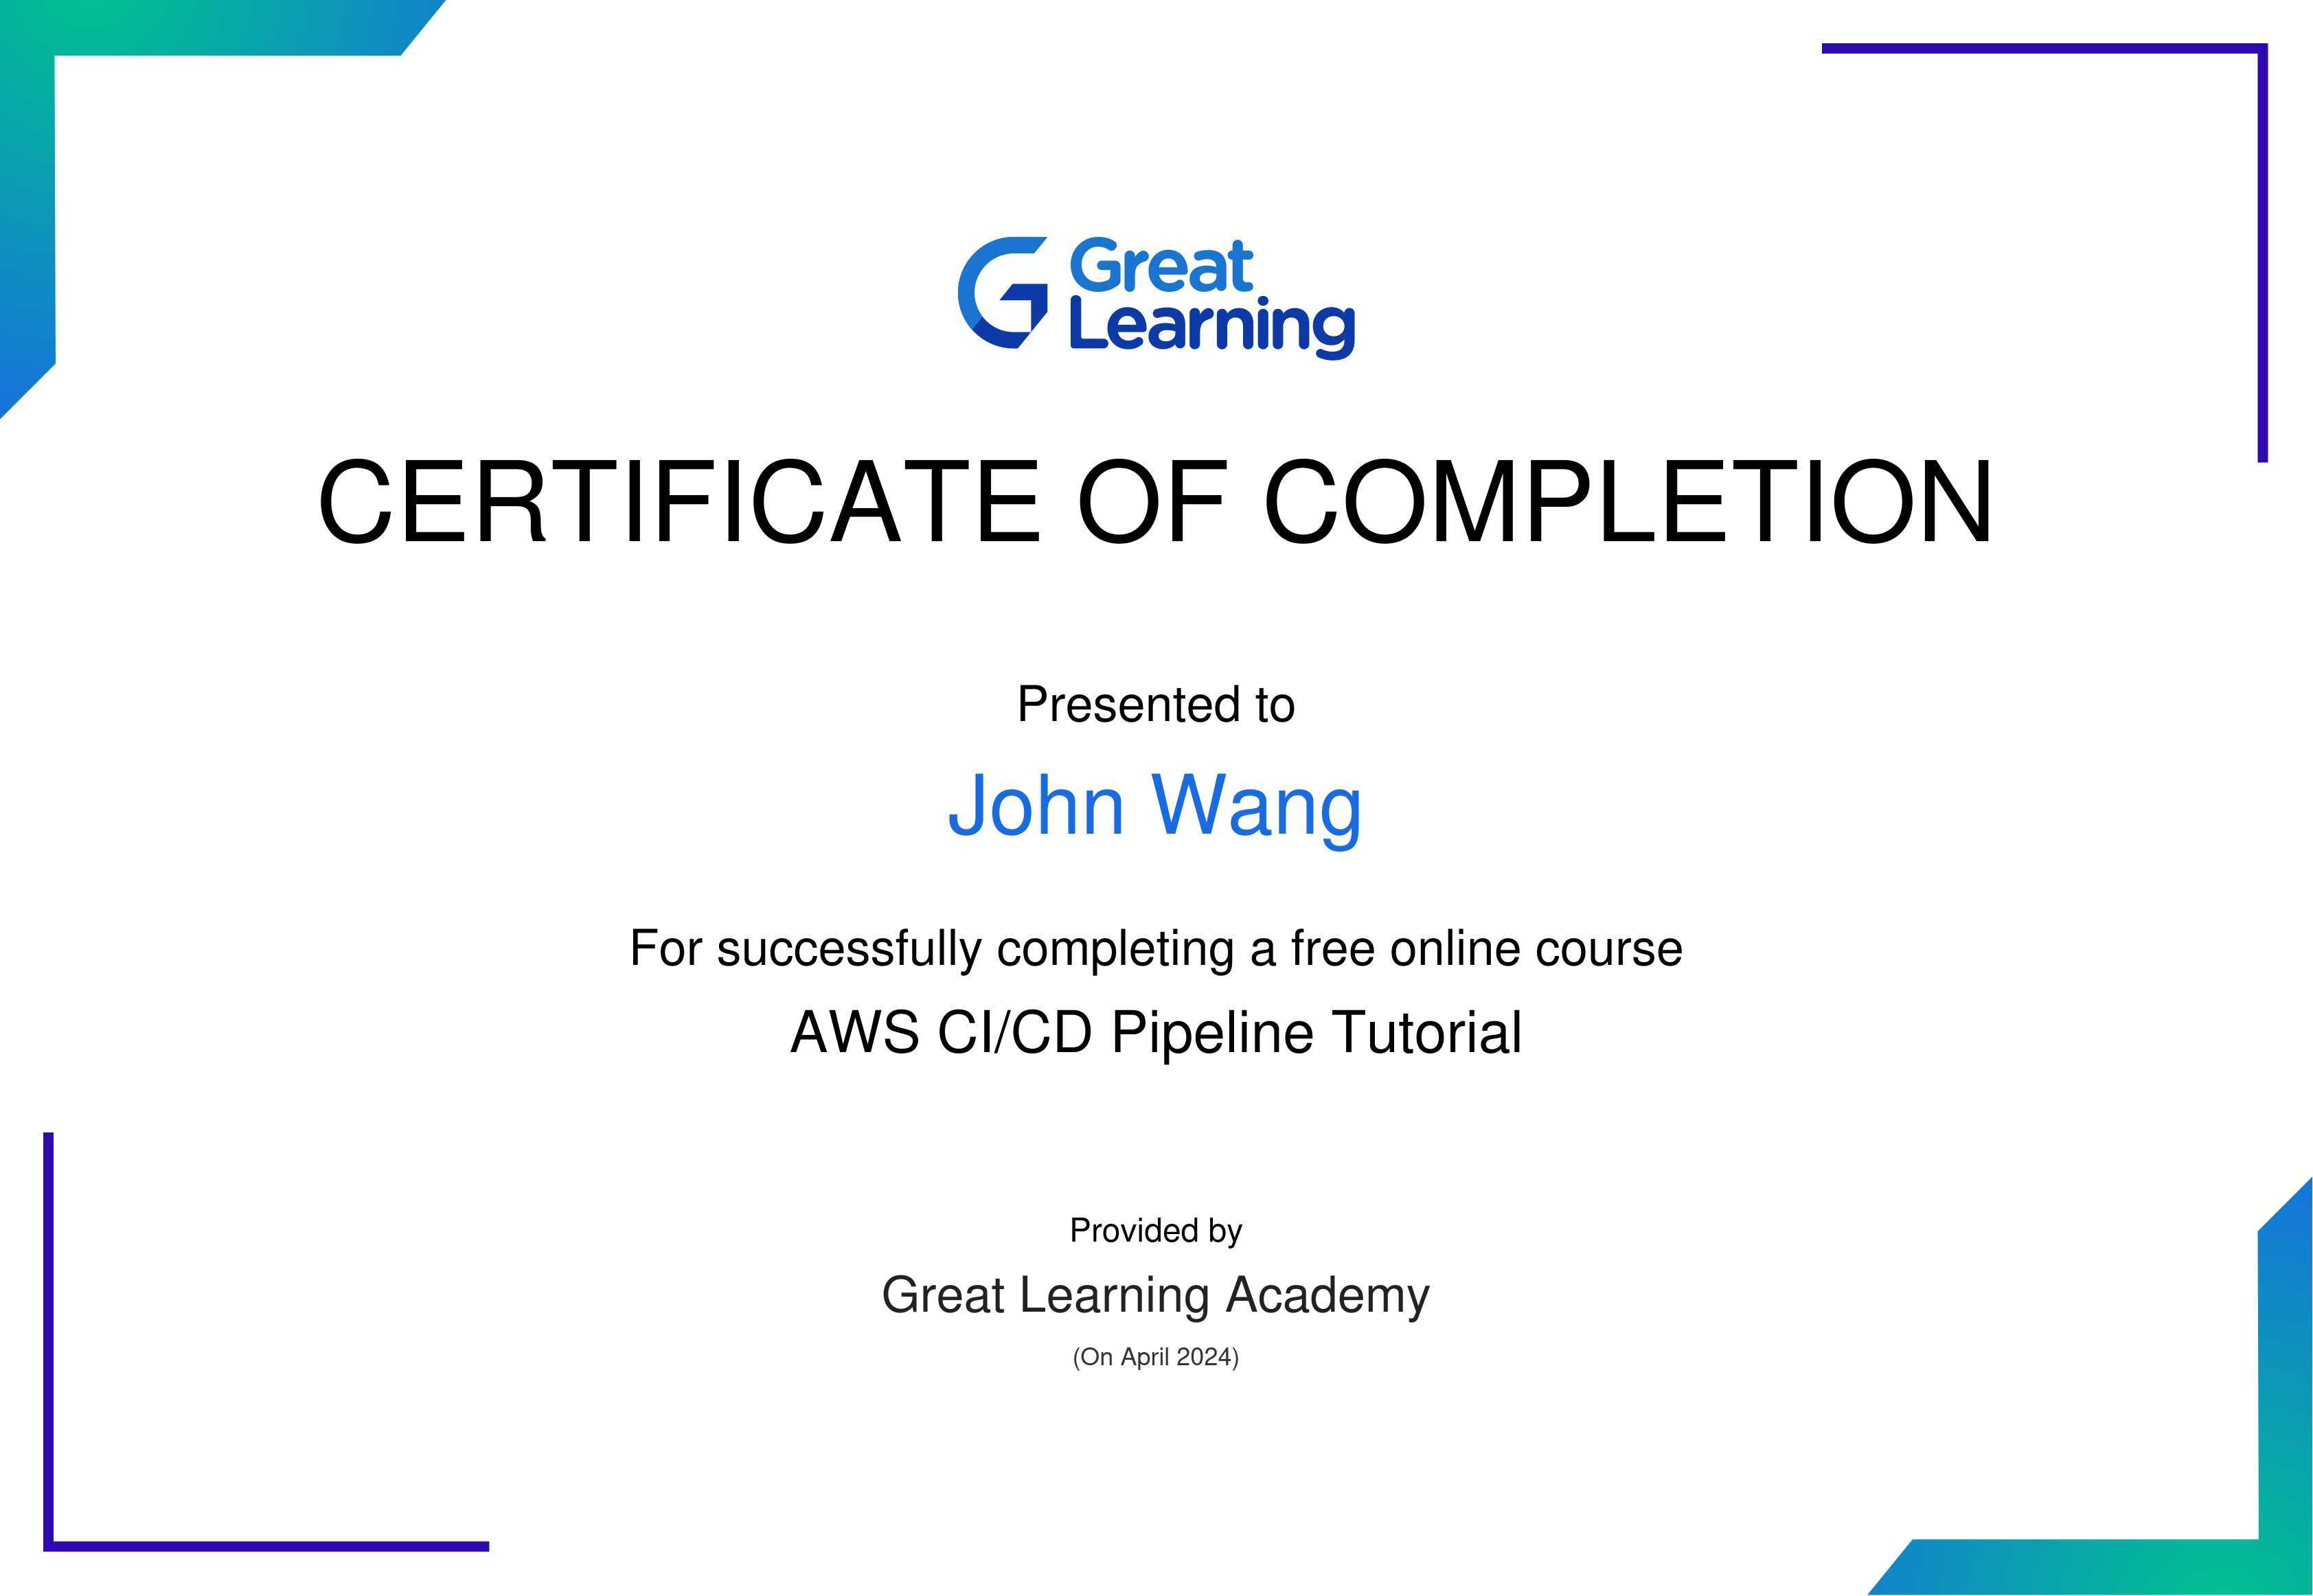 John's AWS CI/CD Pipeline from Great Learning Academy